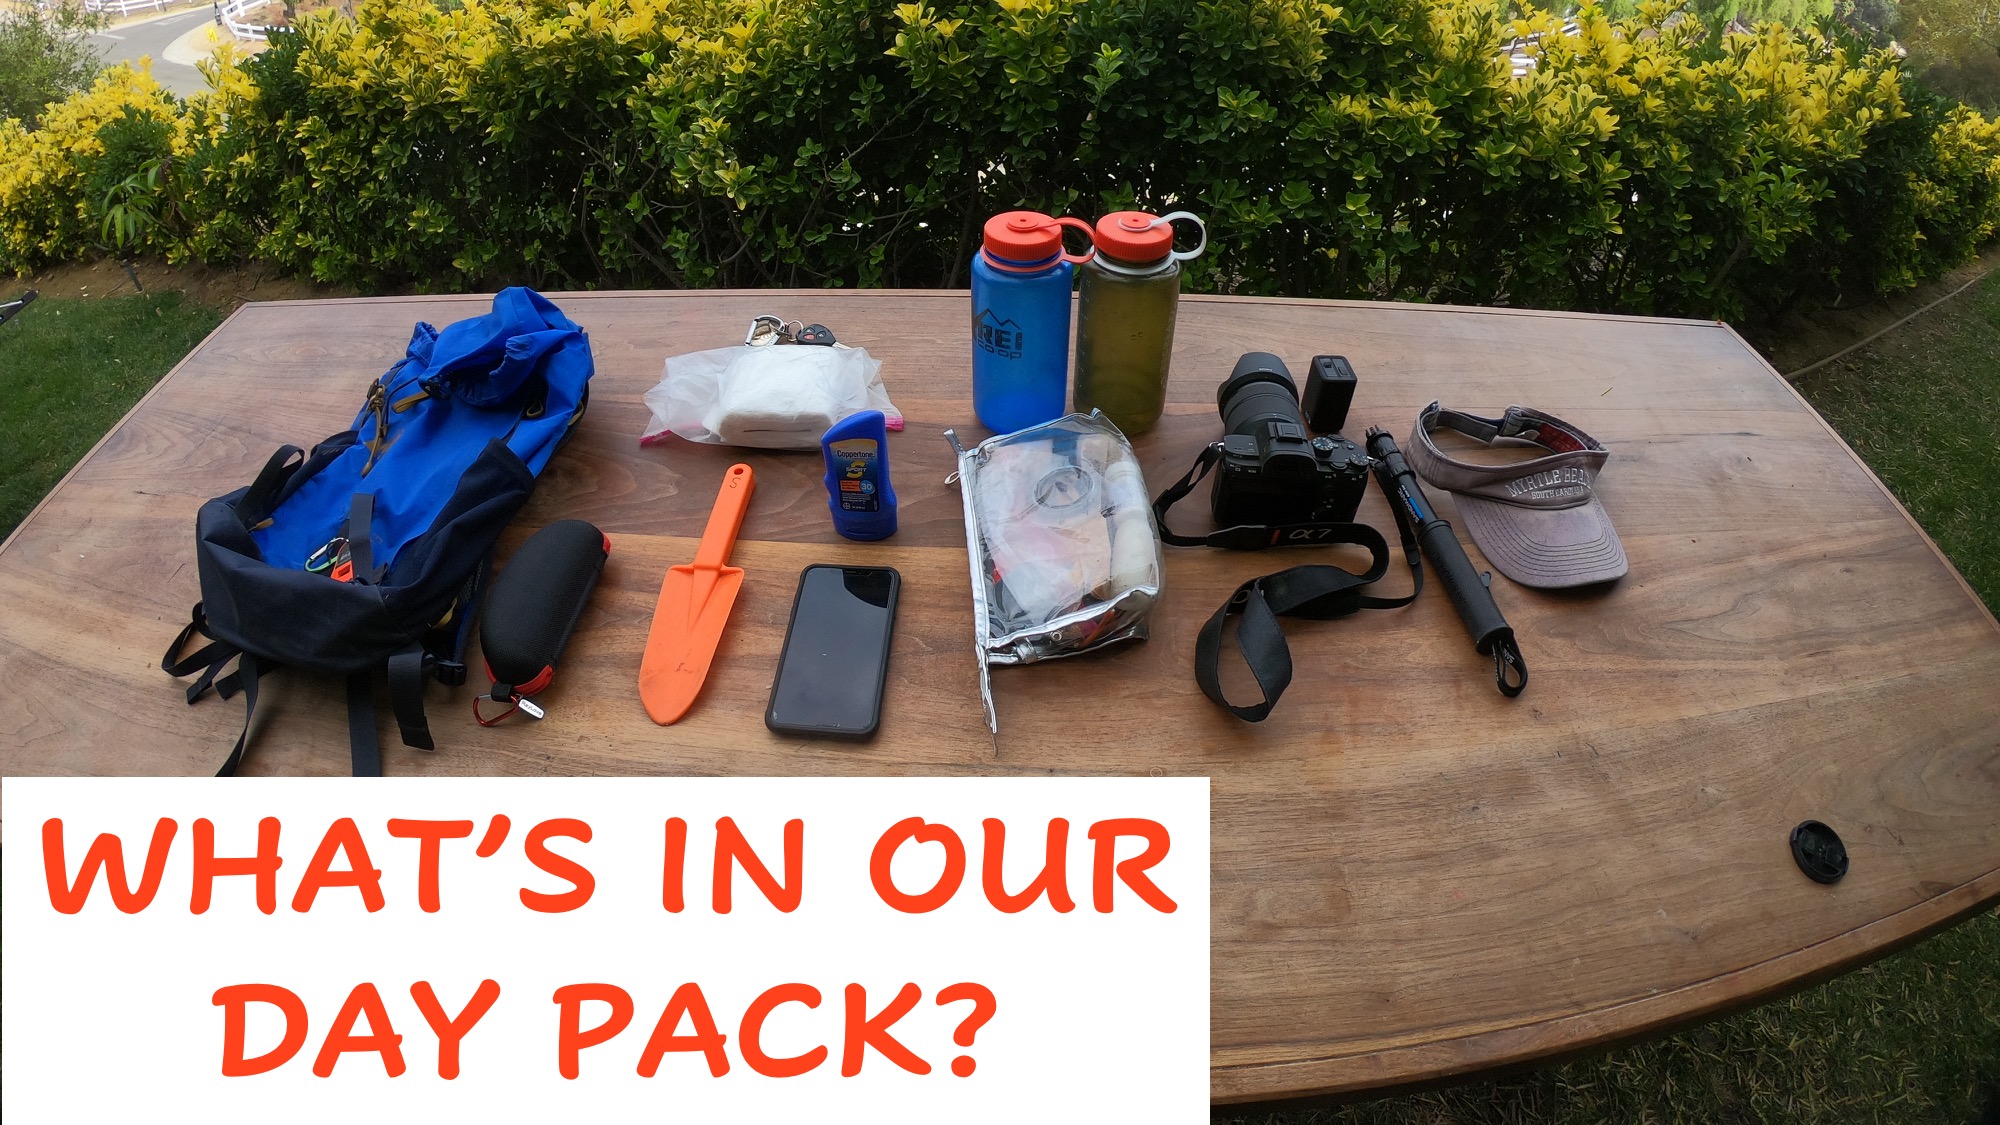 WHAT'S IN OUR DAY PACK?